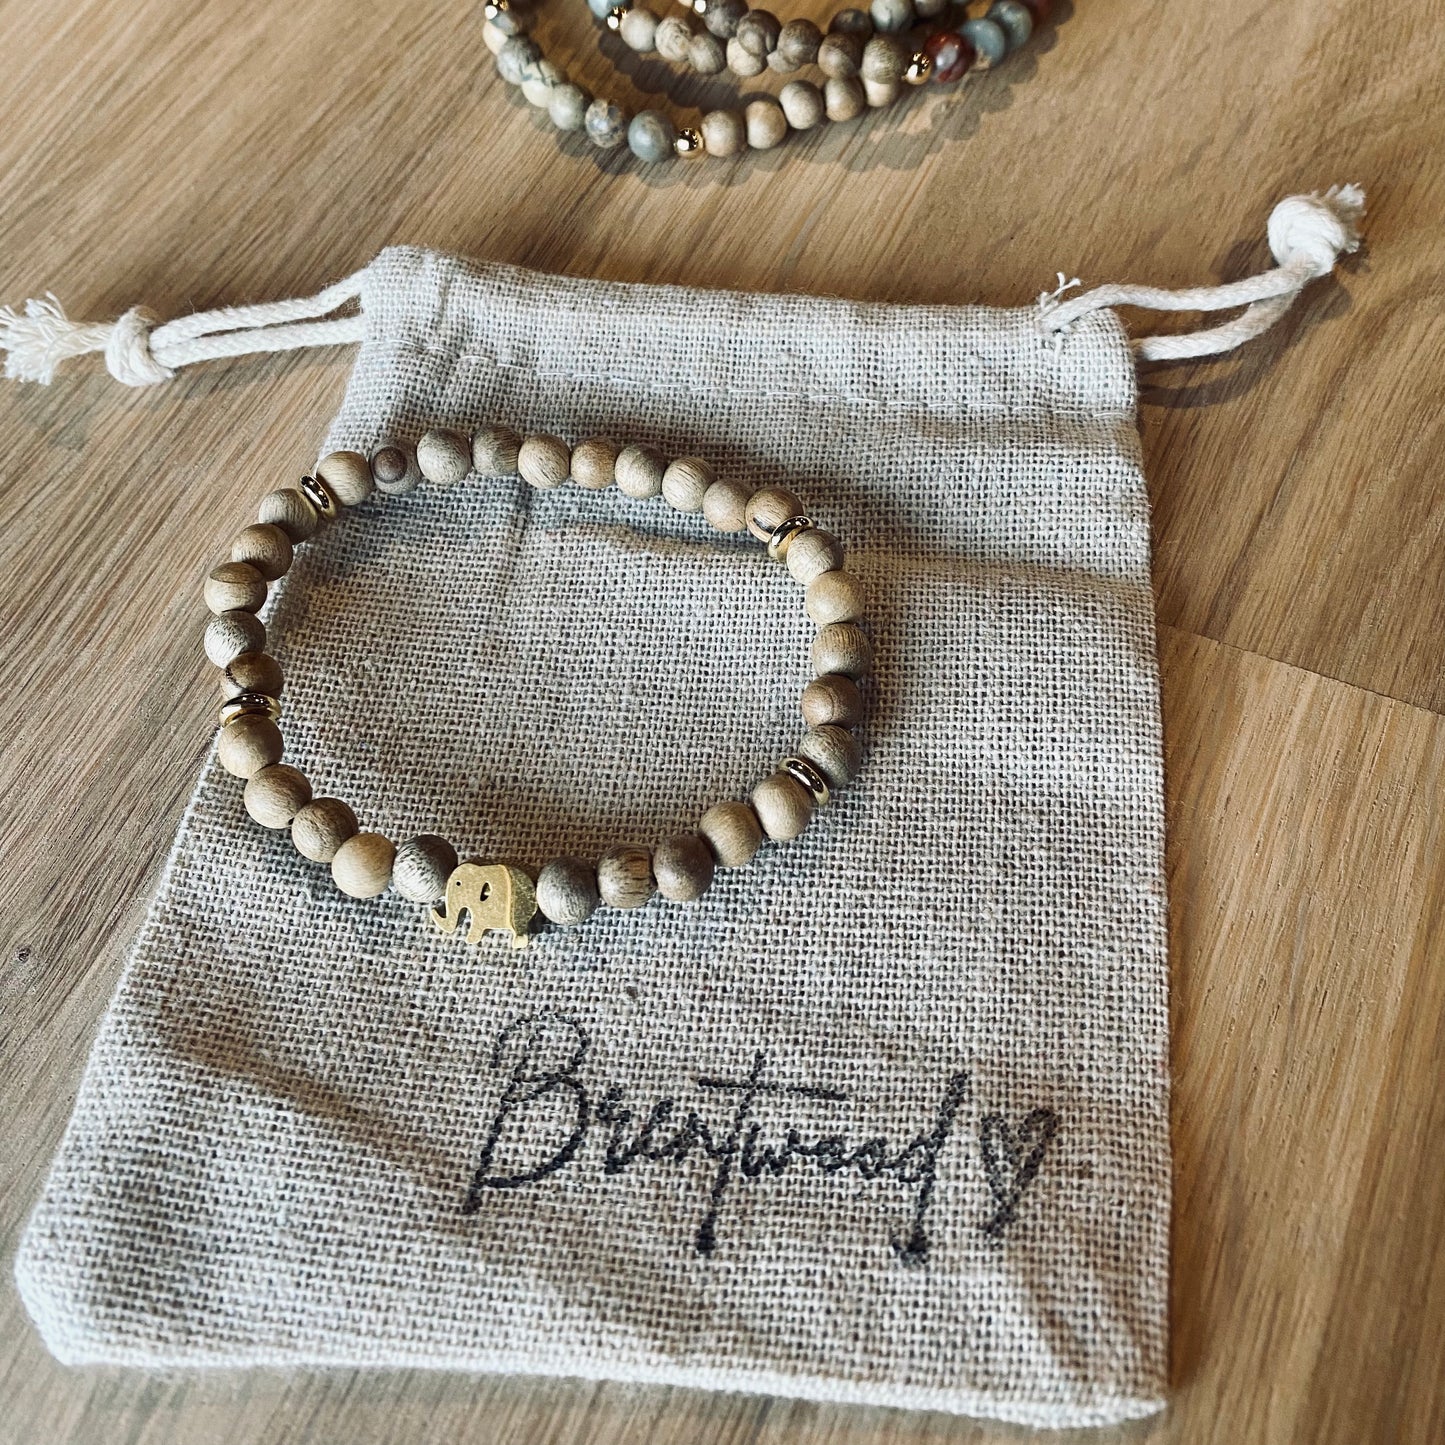 Gold Elephant aroma bracelet/diffuser bracelet made from 6mm burly wood beads beads with gold lucky elephant charm and gold disc embellishments.  Laid on cloth pouch/drawstring bag stamped with “Brentwood” and a heart.